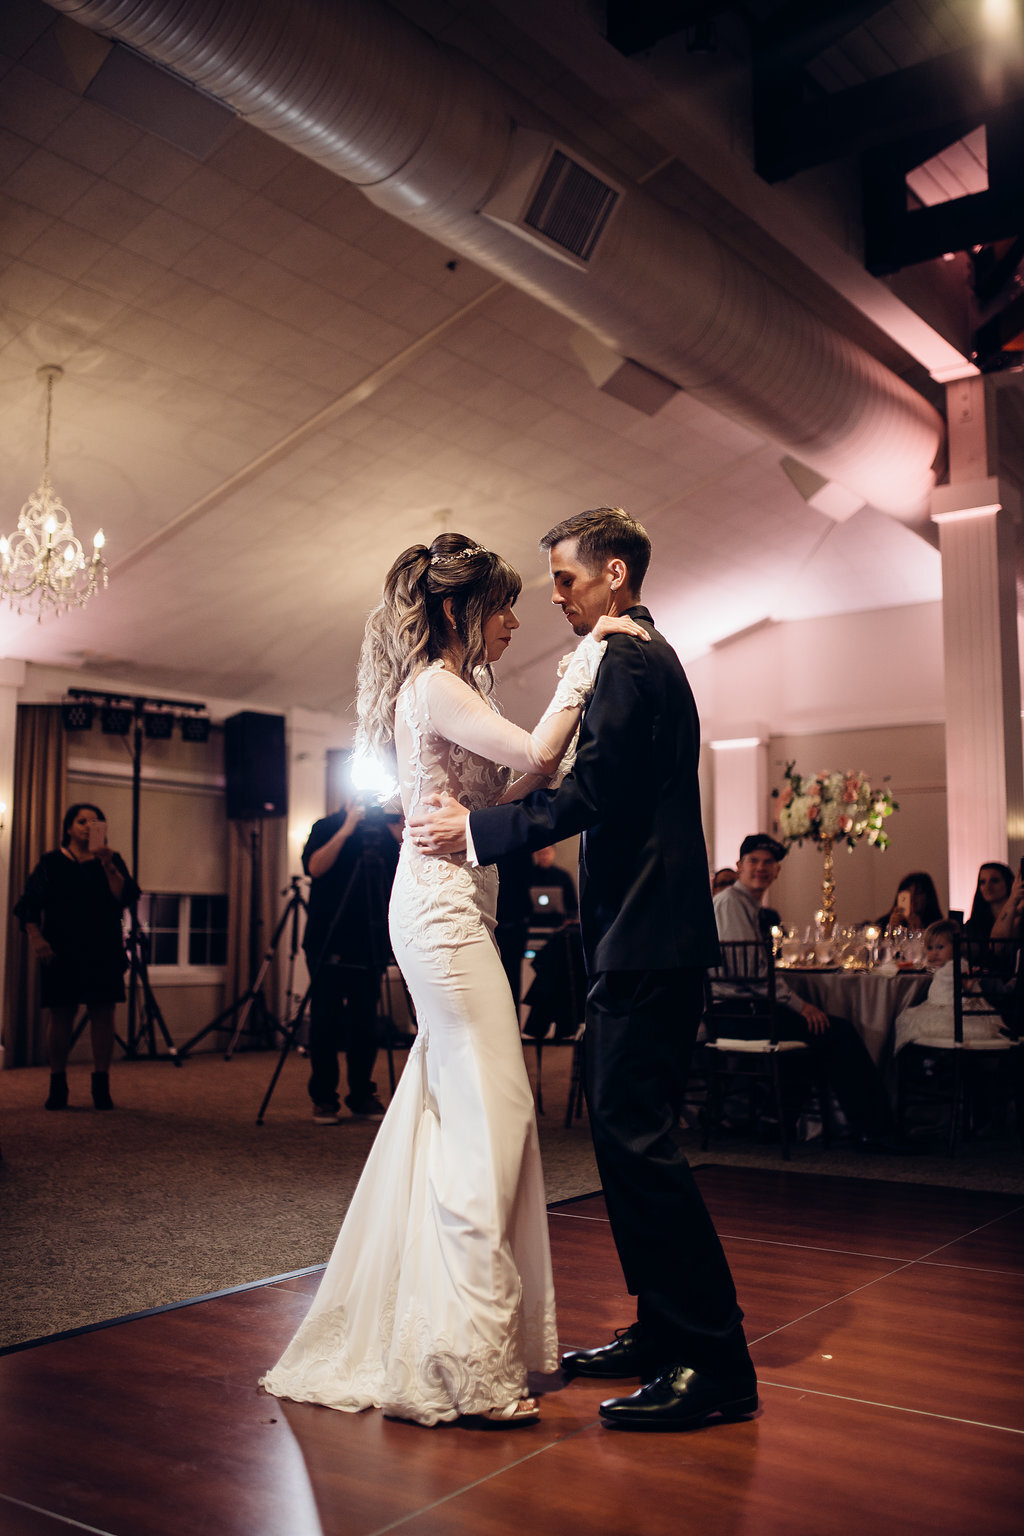 Wedding Photograph Of Bride In White Dress And Groom In Black Suit Dancing Los Angeles